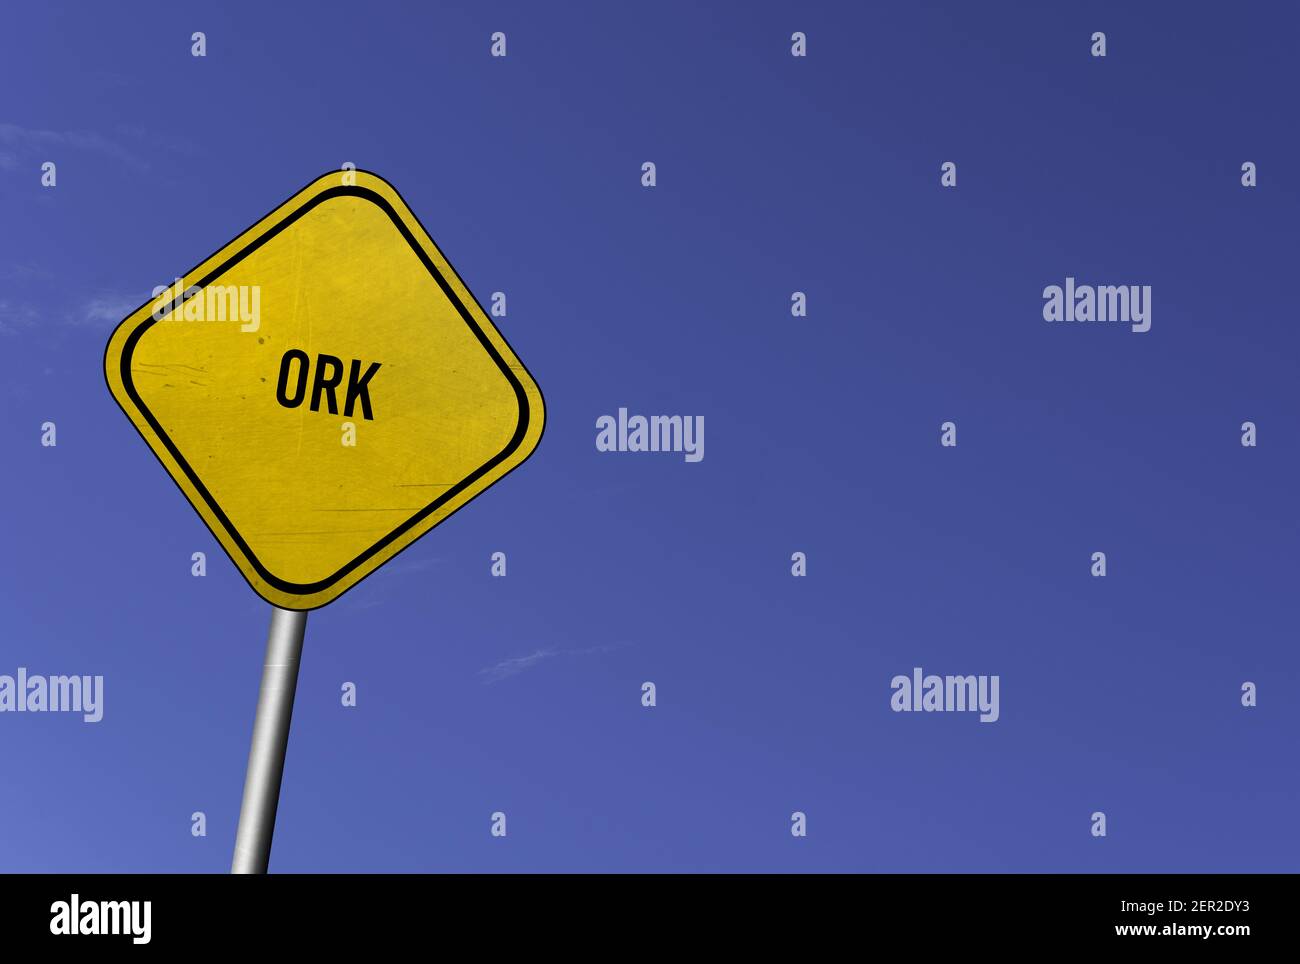 Ork - yellow sign with blue sky background Stock Photo